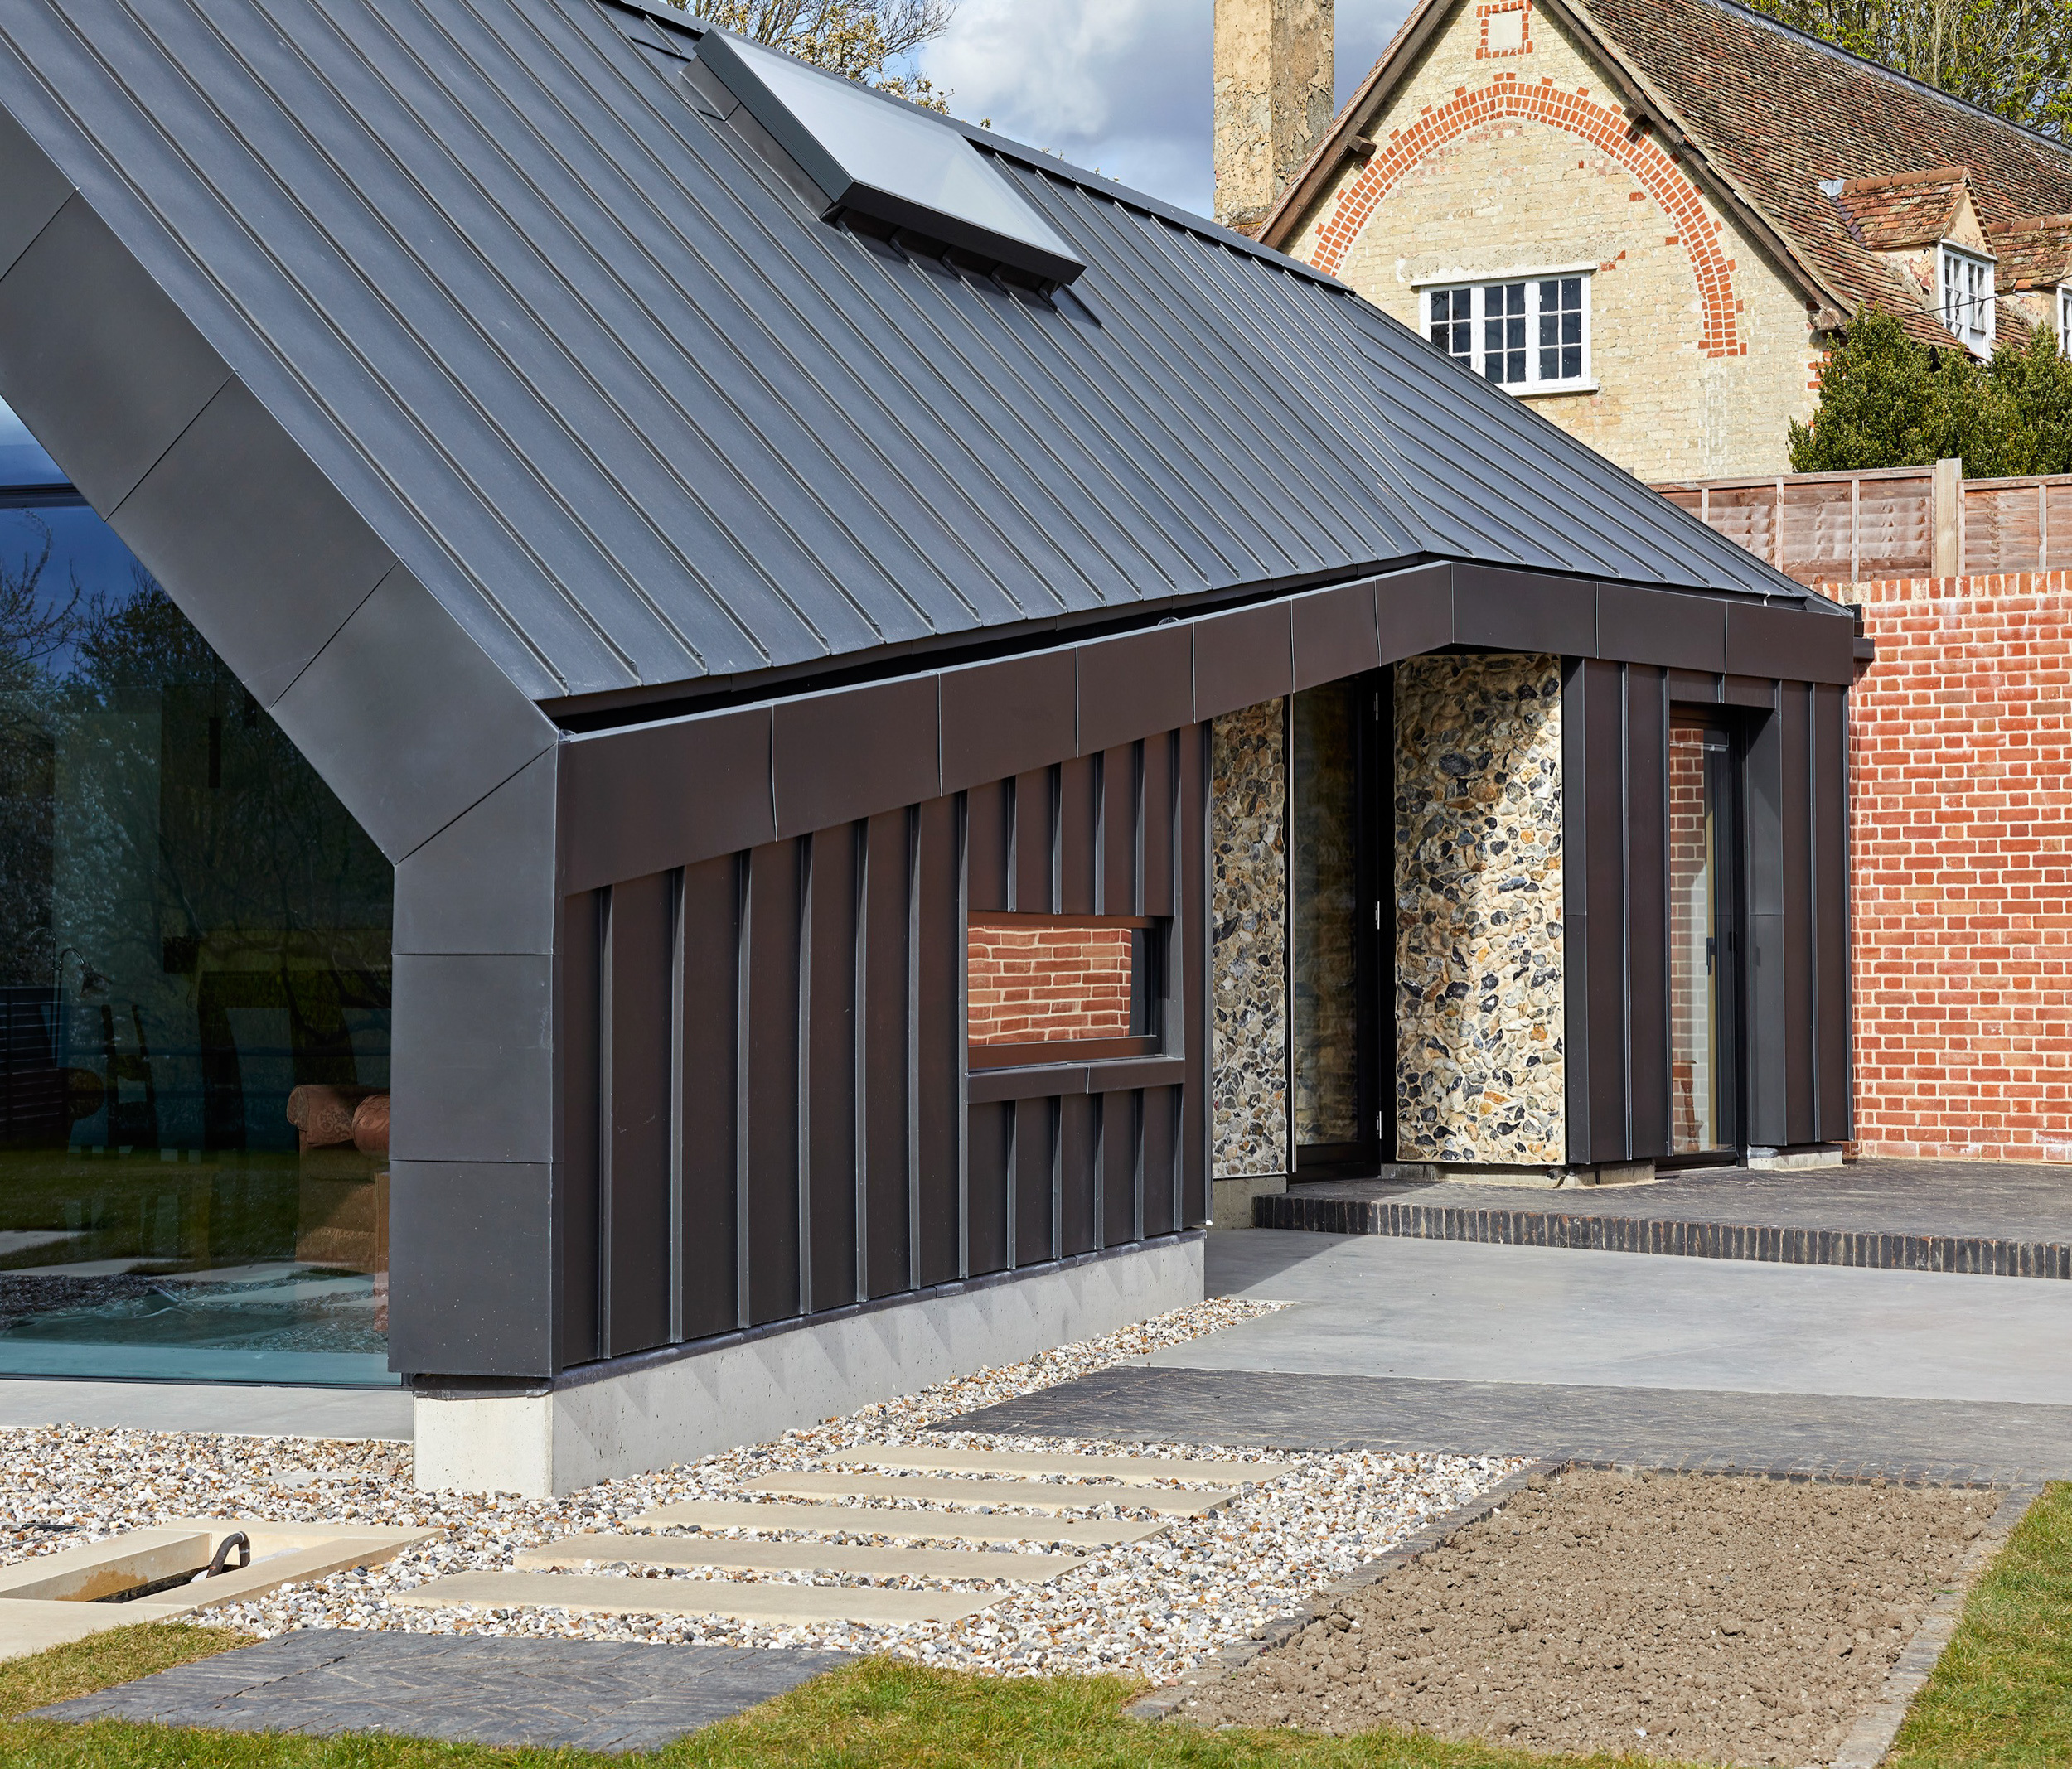 Zinc pitched roof meeting flint wall of house | cdc studio cambridge architects